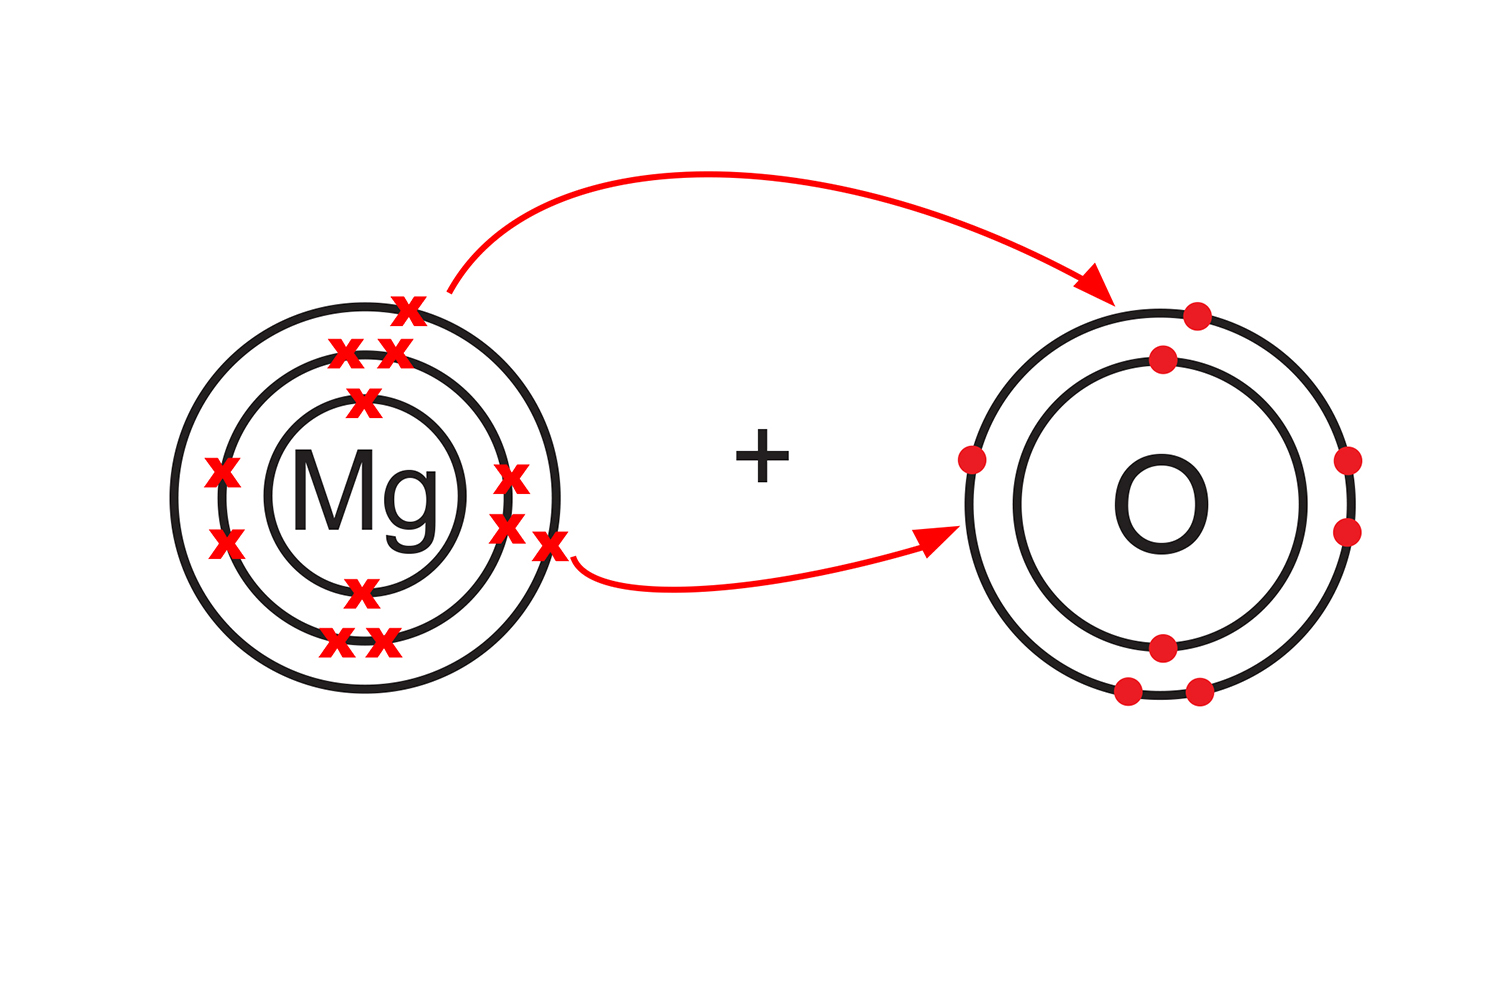 Similarly group 2 and 6 have the same valency of 2 meaning they are  likely to react. Magnesium (group 2) looses 2 valence electrons to oxygen (group 6) 